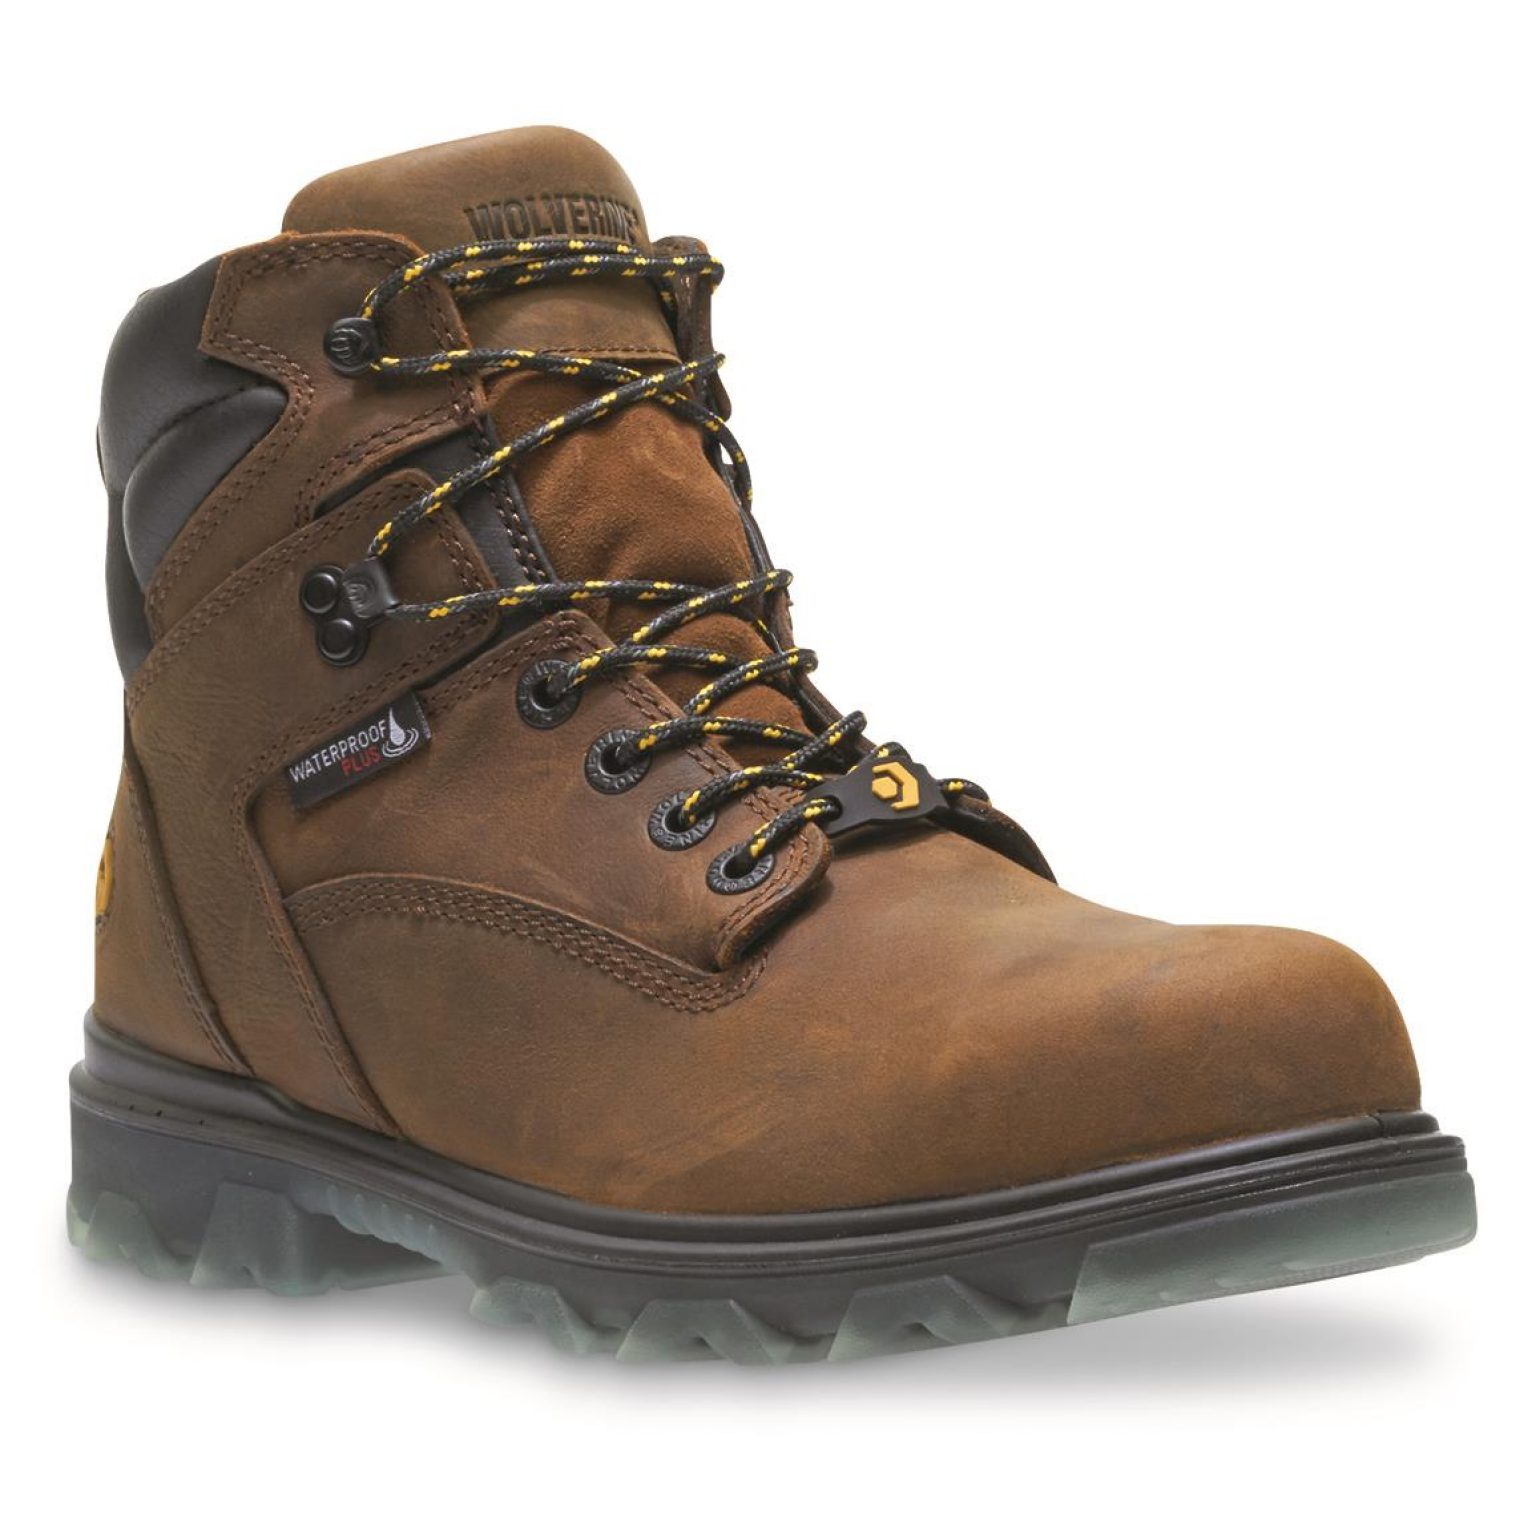 Wolverine Men's I-90 EPX Waterproof Composite Toe Work Boots - PEWPEW ...